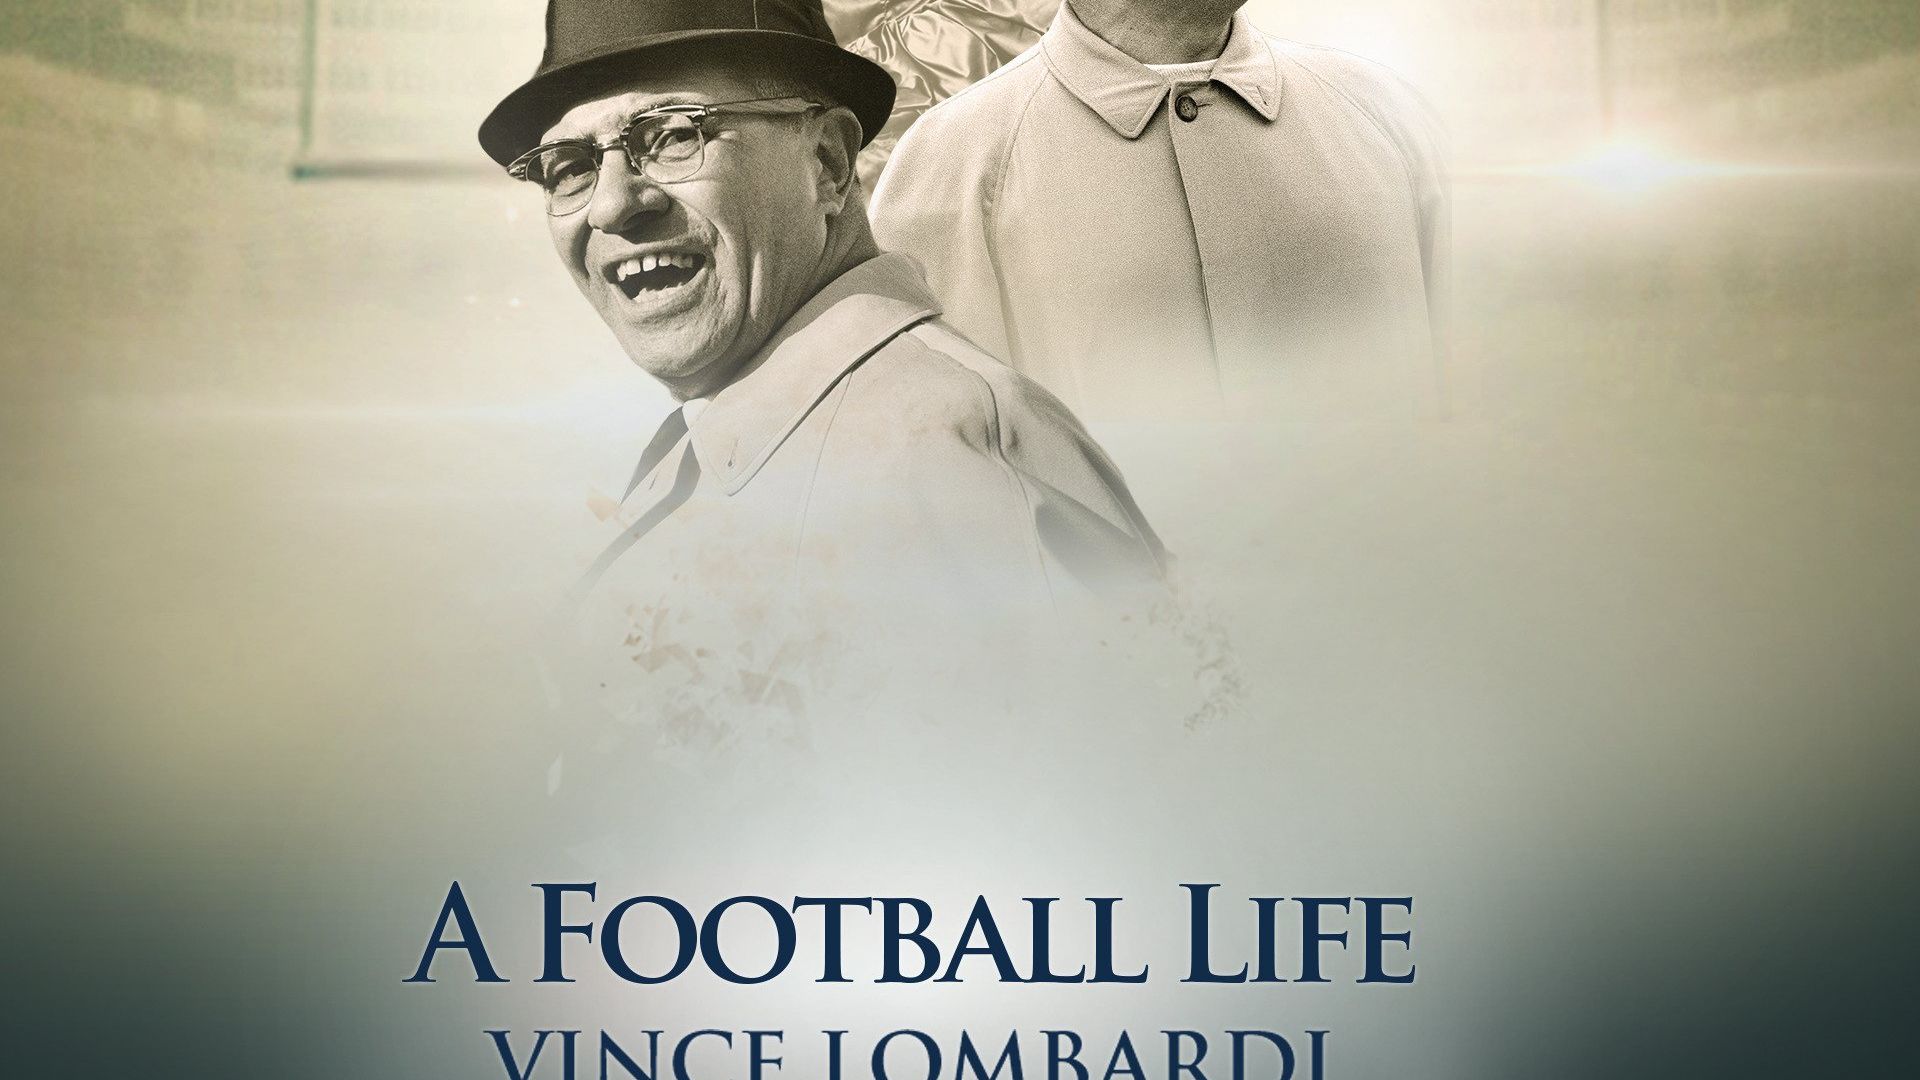 A Football Life background